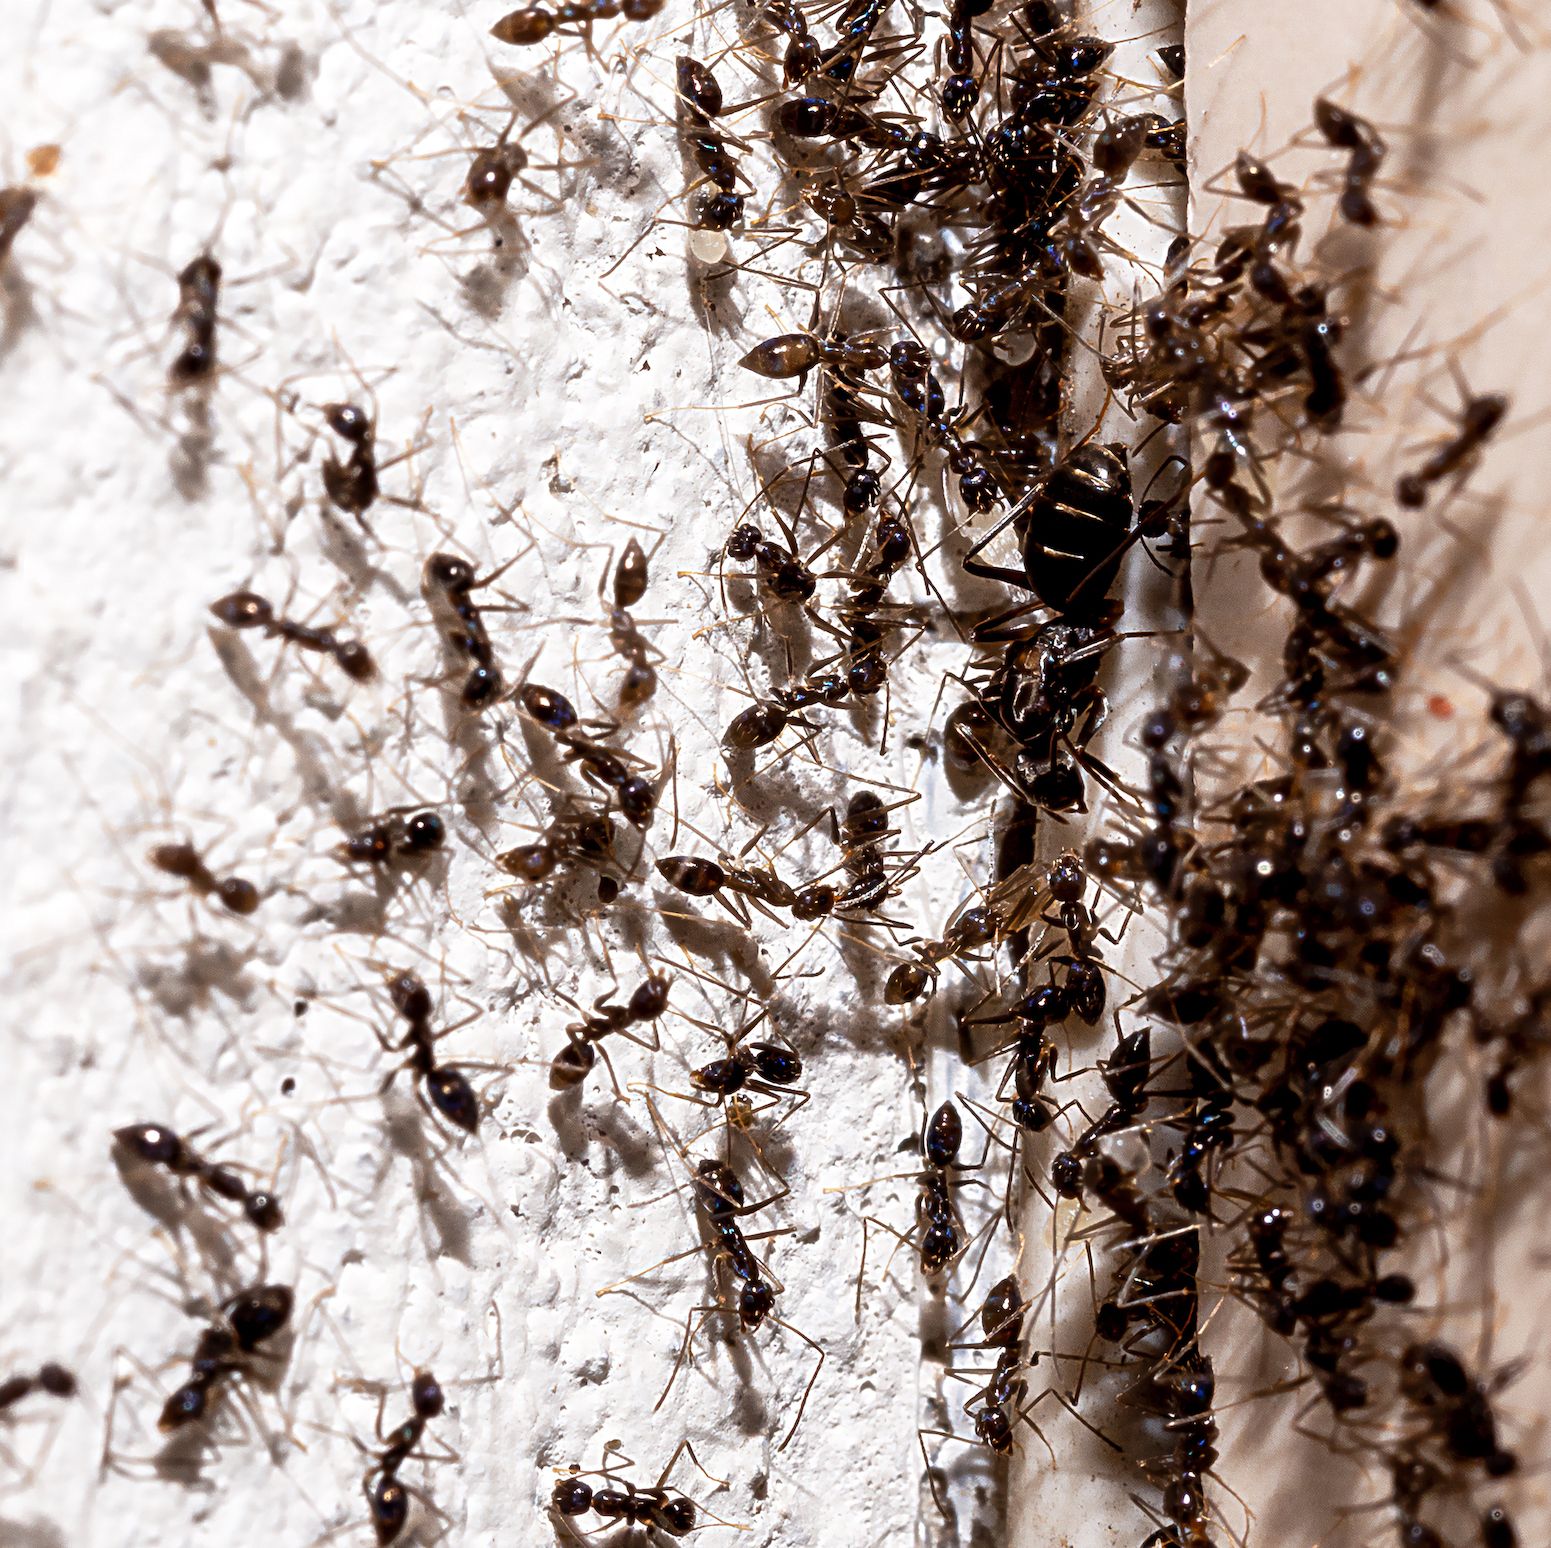 23 Ways On How To Get Rid Of Ants Naturally